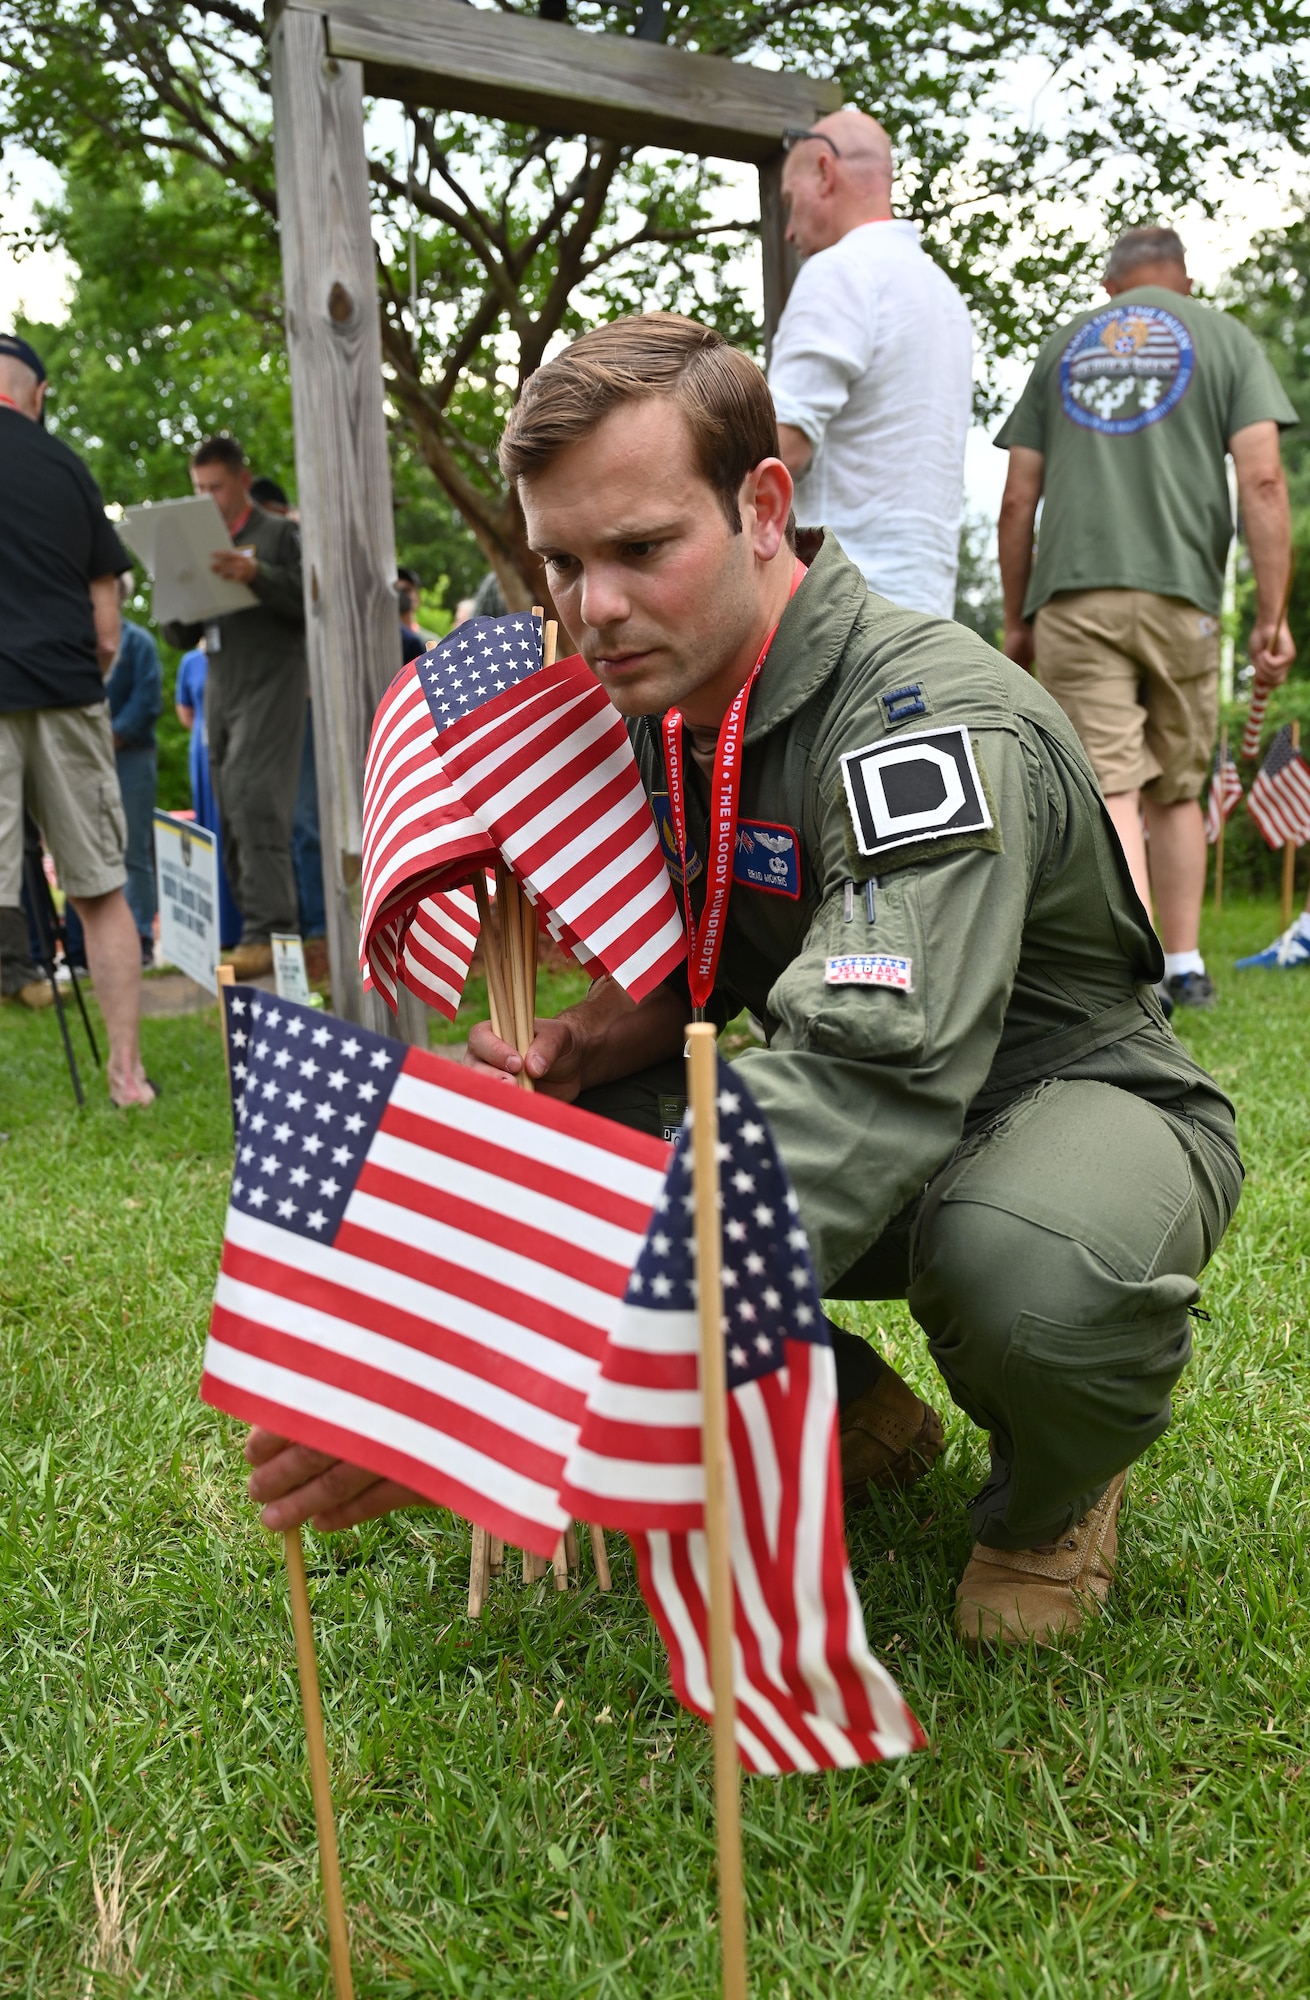 U.S. Air Force Capt. Brad Mokris, 351st Air Refueling Squadron, assistant B-flight commander and KC-135 Stratotanker aircraft commander, places flags at the 100th Bomb Group reunion and Flags for the Fallen event at the National Museum for the Mighty Eighth Air Force, in Savannah, Georgia, May 25, 2023. In the days leading up to Memorial Day, 26,000 flags were placed, each representing an Eighth Air Force Airmen lost during World War II. The 100th BG lost 757 men, each represented by a flag placed by attendees at the 100th Bomb Group reunion, including Airmen from RAF Mildenhall. (U.S. Air Force photo by Karen Abeyasekere)